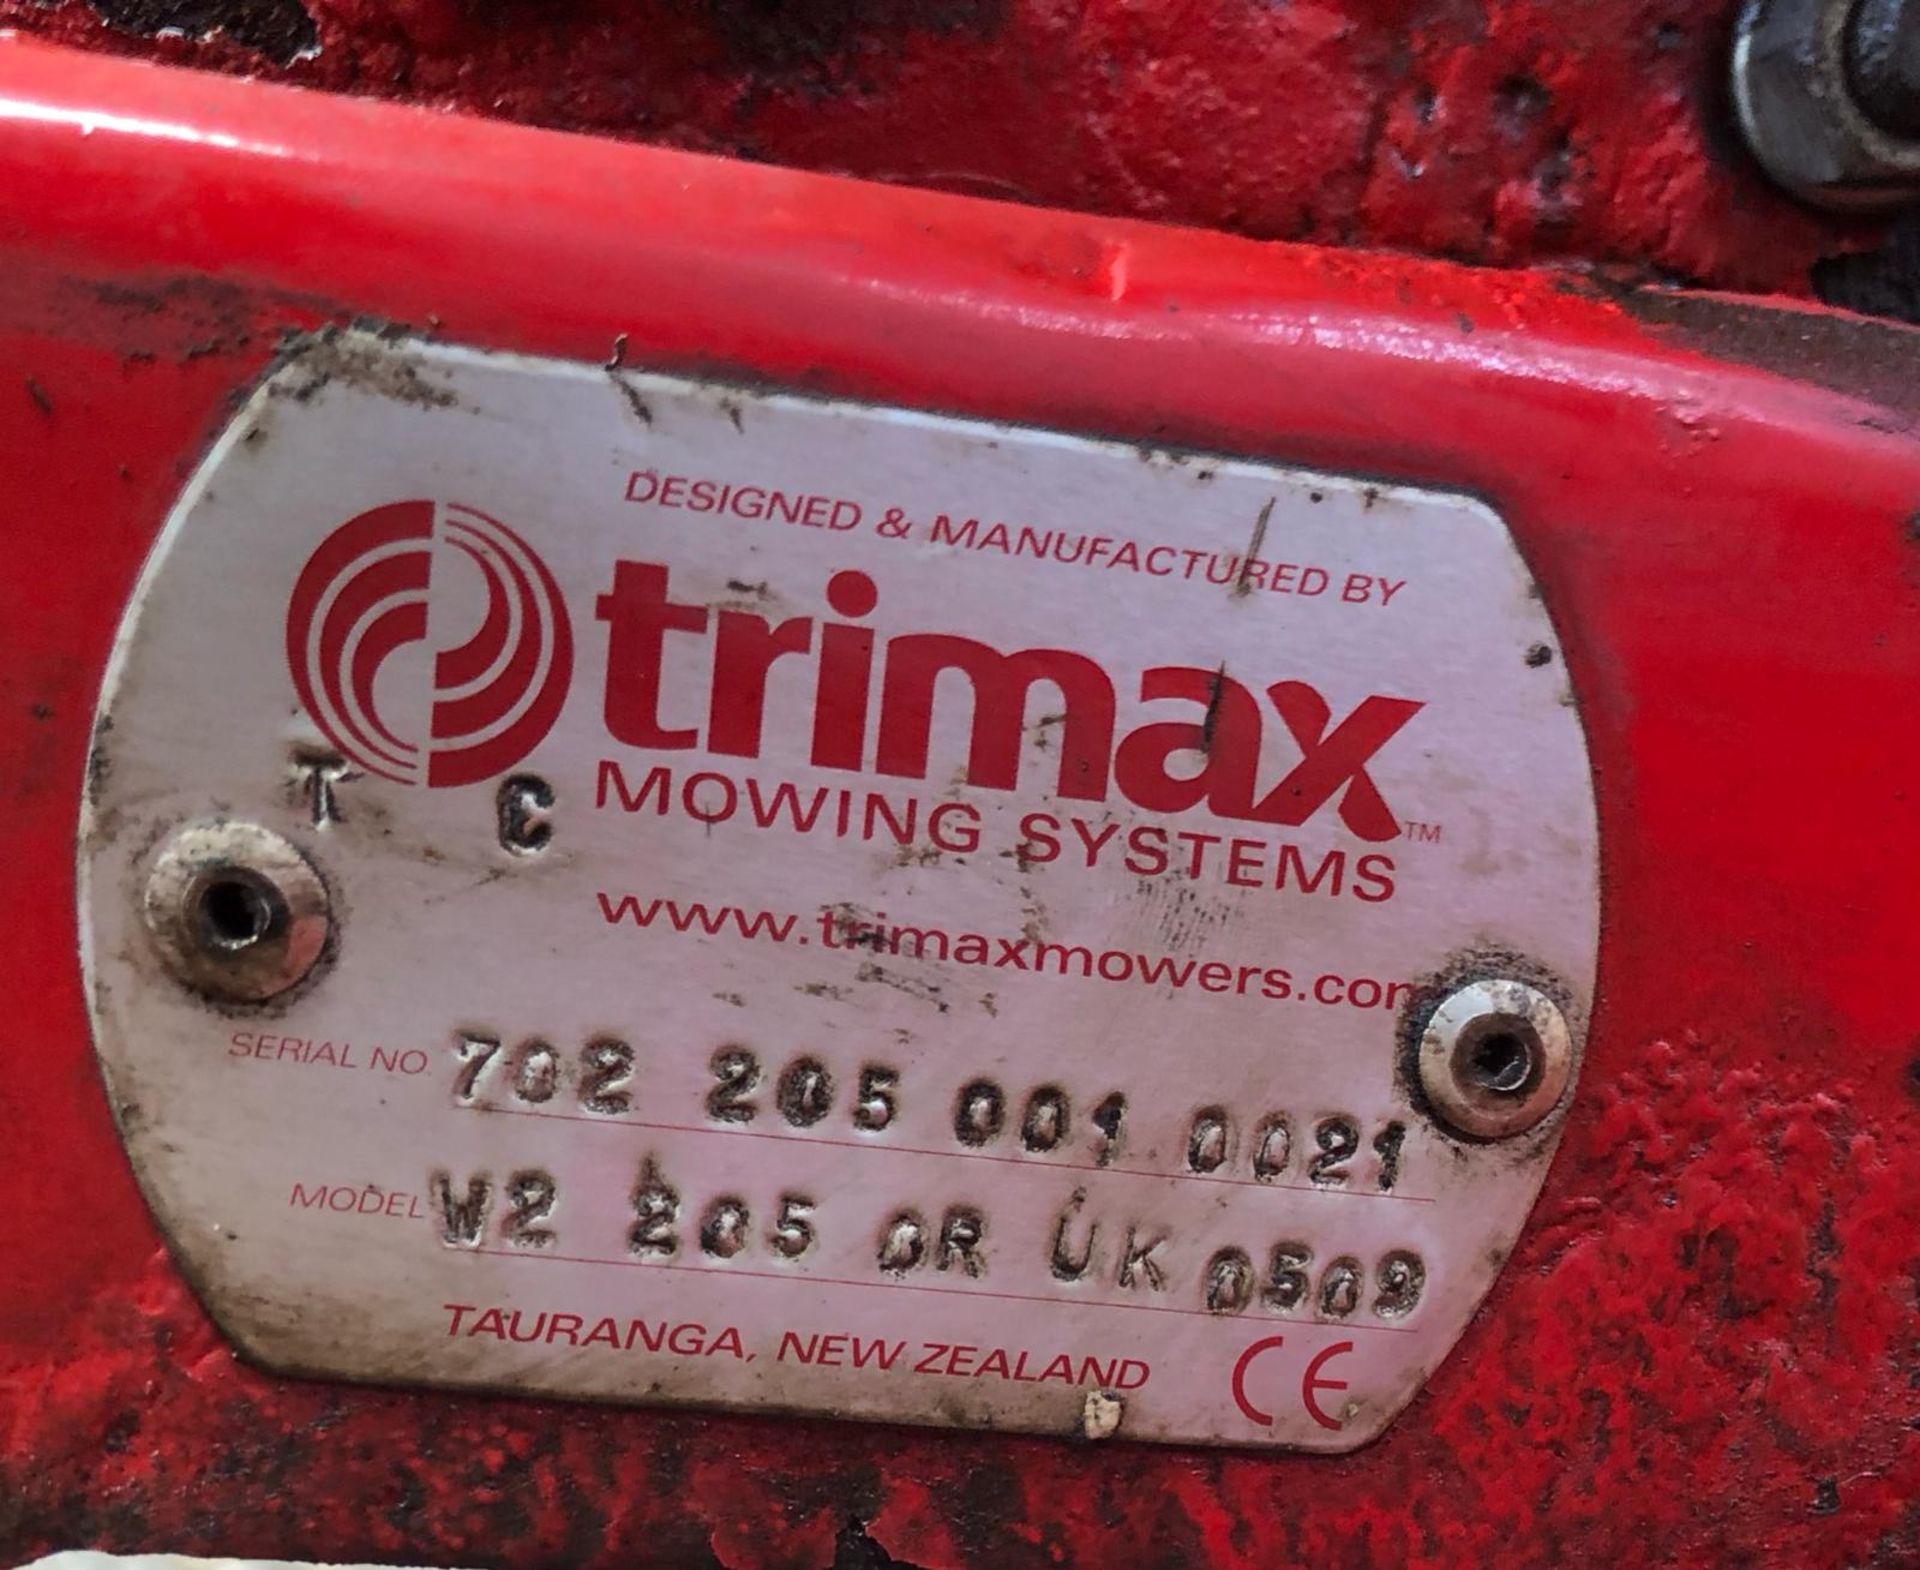 TRIMAX FLAIL MOWER, MODEL WARLORD S2 205 IN GOOD WORKING ORDER *NO VAT* - Image 2 of 5